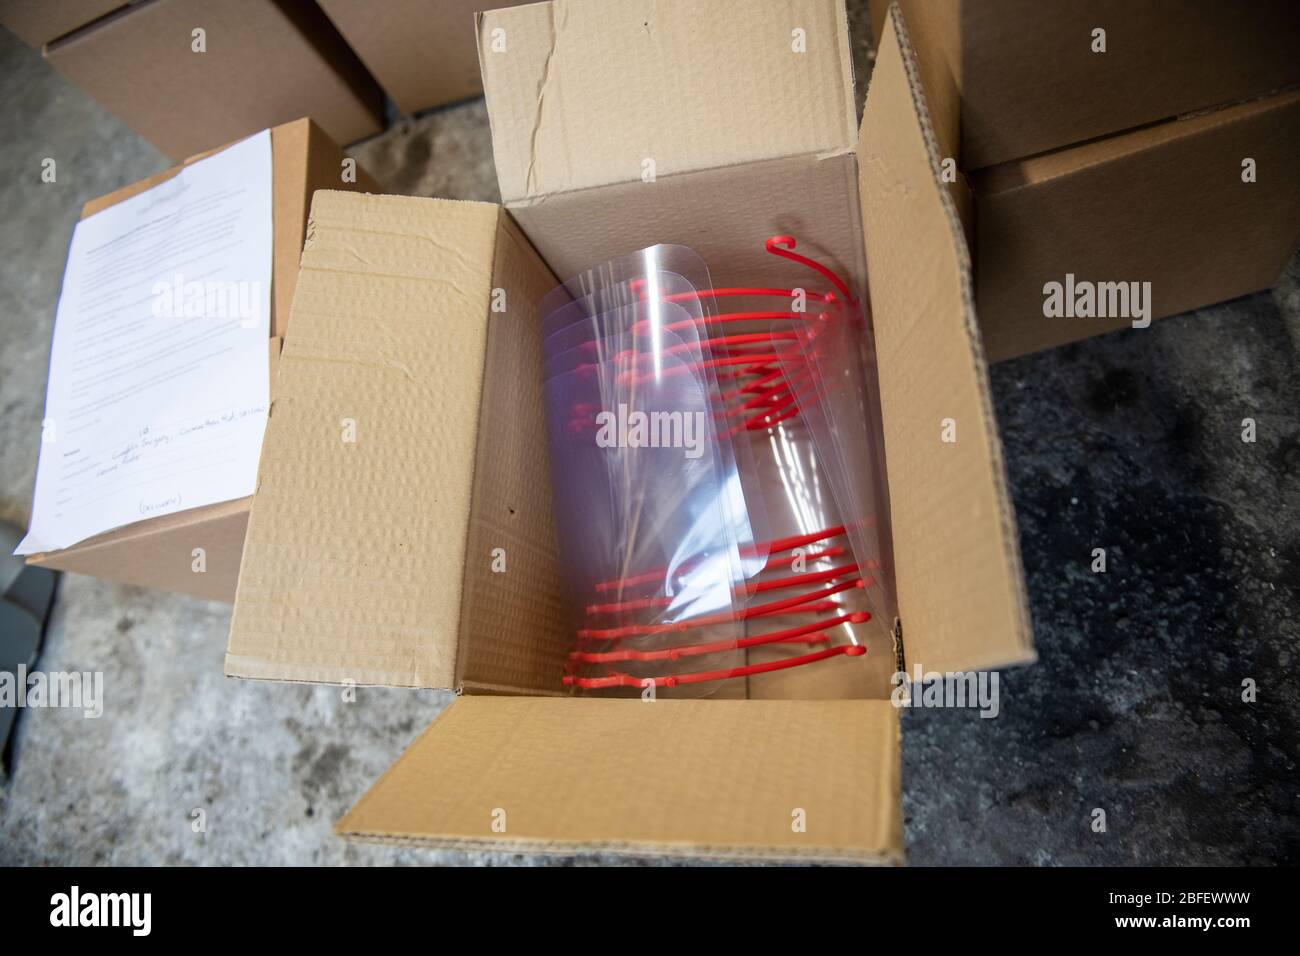 Protective visors delivered in boxes to be distributed to local healthcare workers in South Wales during the Covid pandemic crisis. Produced partially Stock Photo